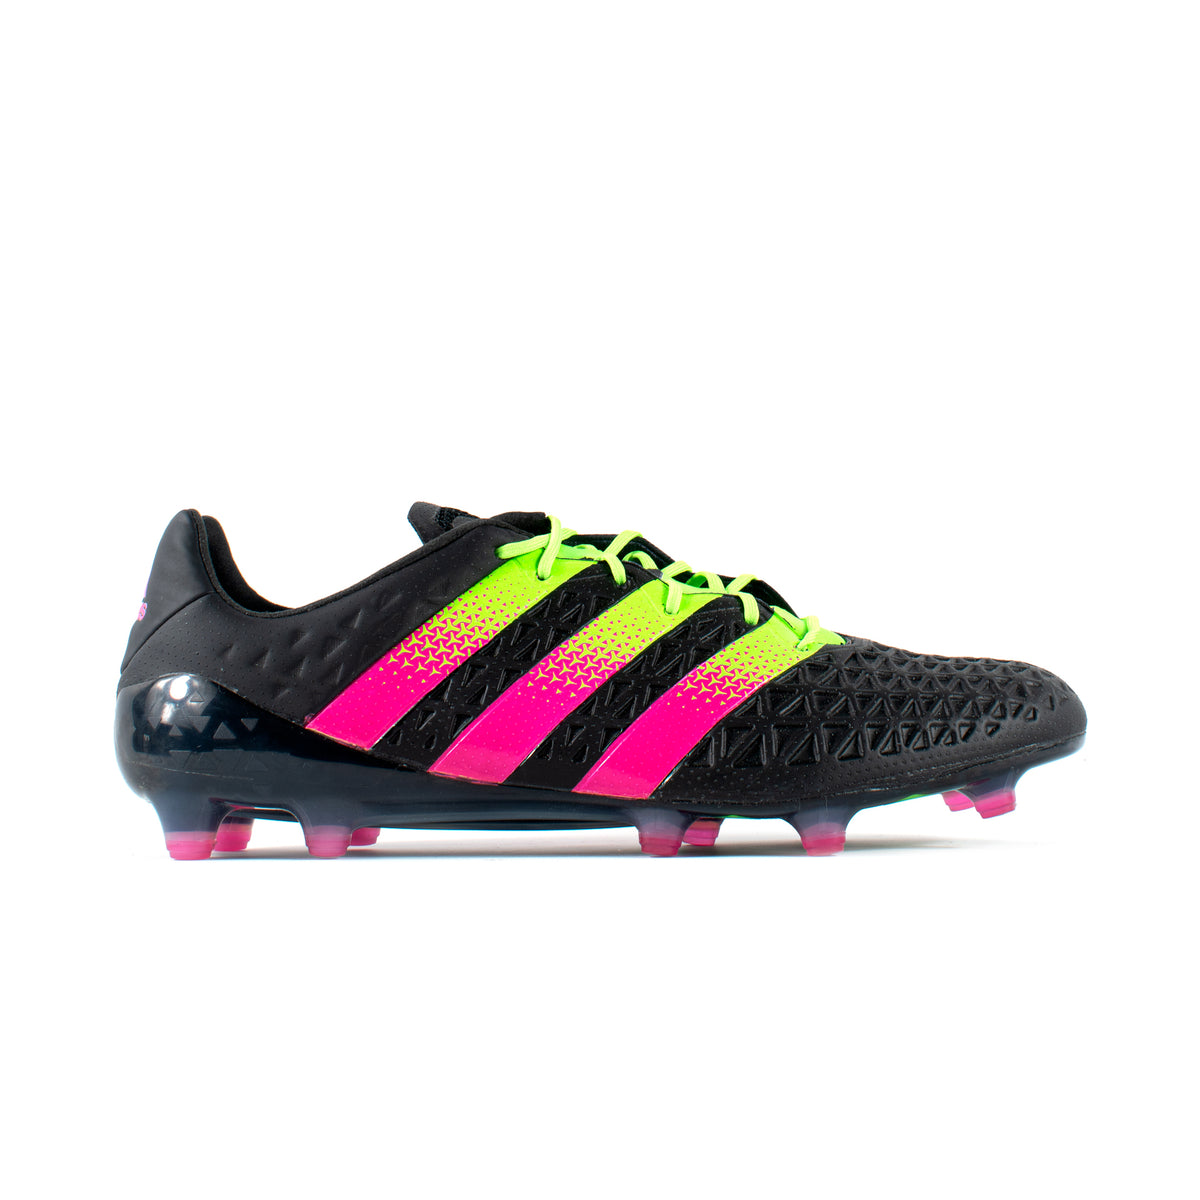 Glad tieners Netelig Adidas Ace 16.1 Black Pink FG – Classic Soccer Cleats